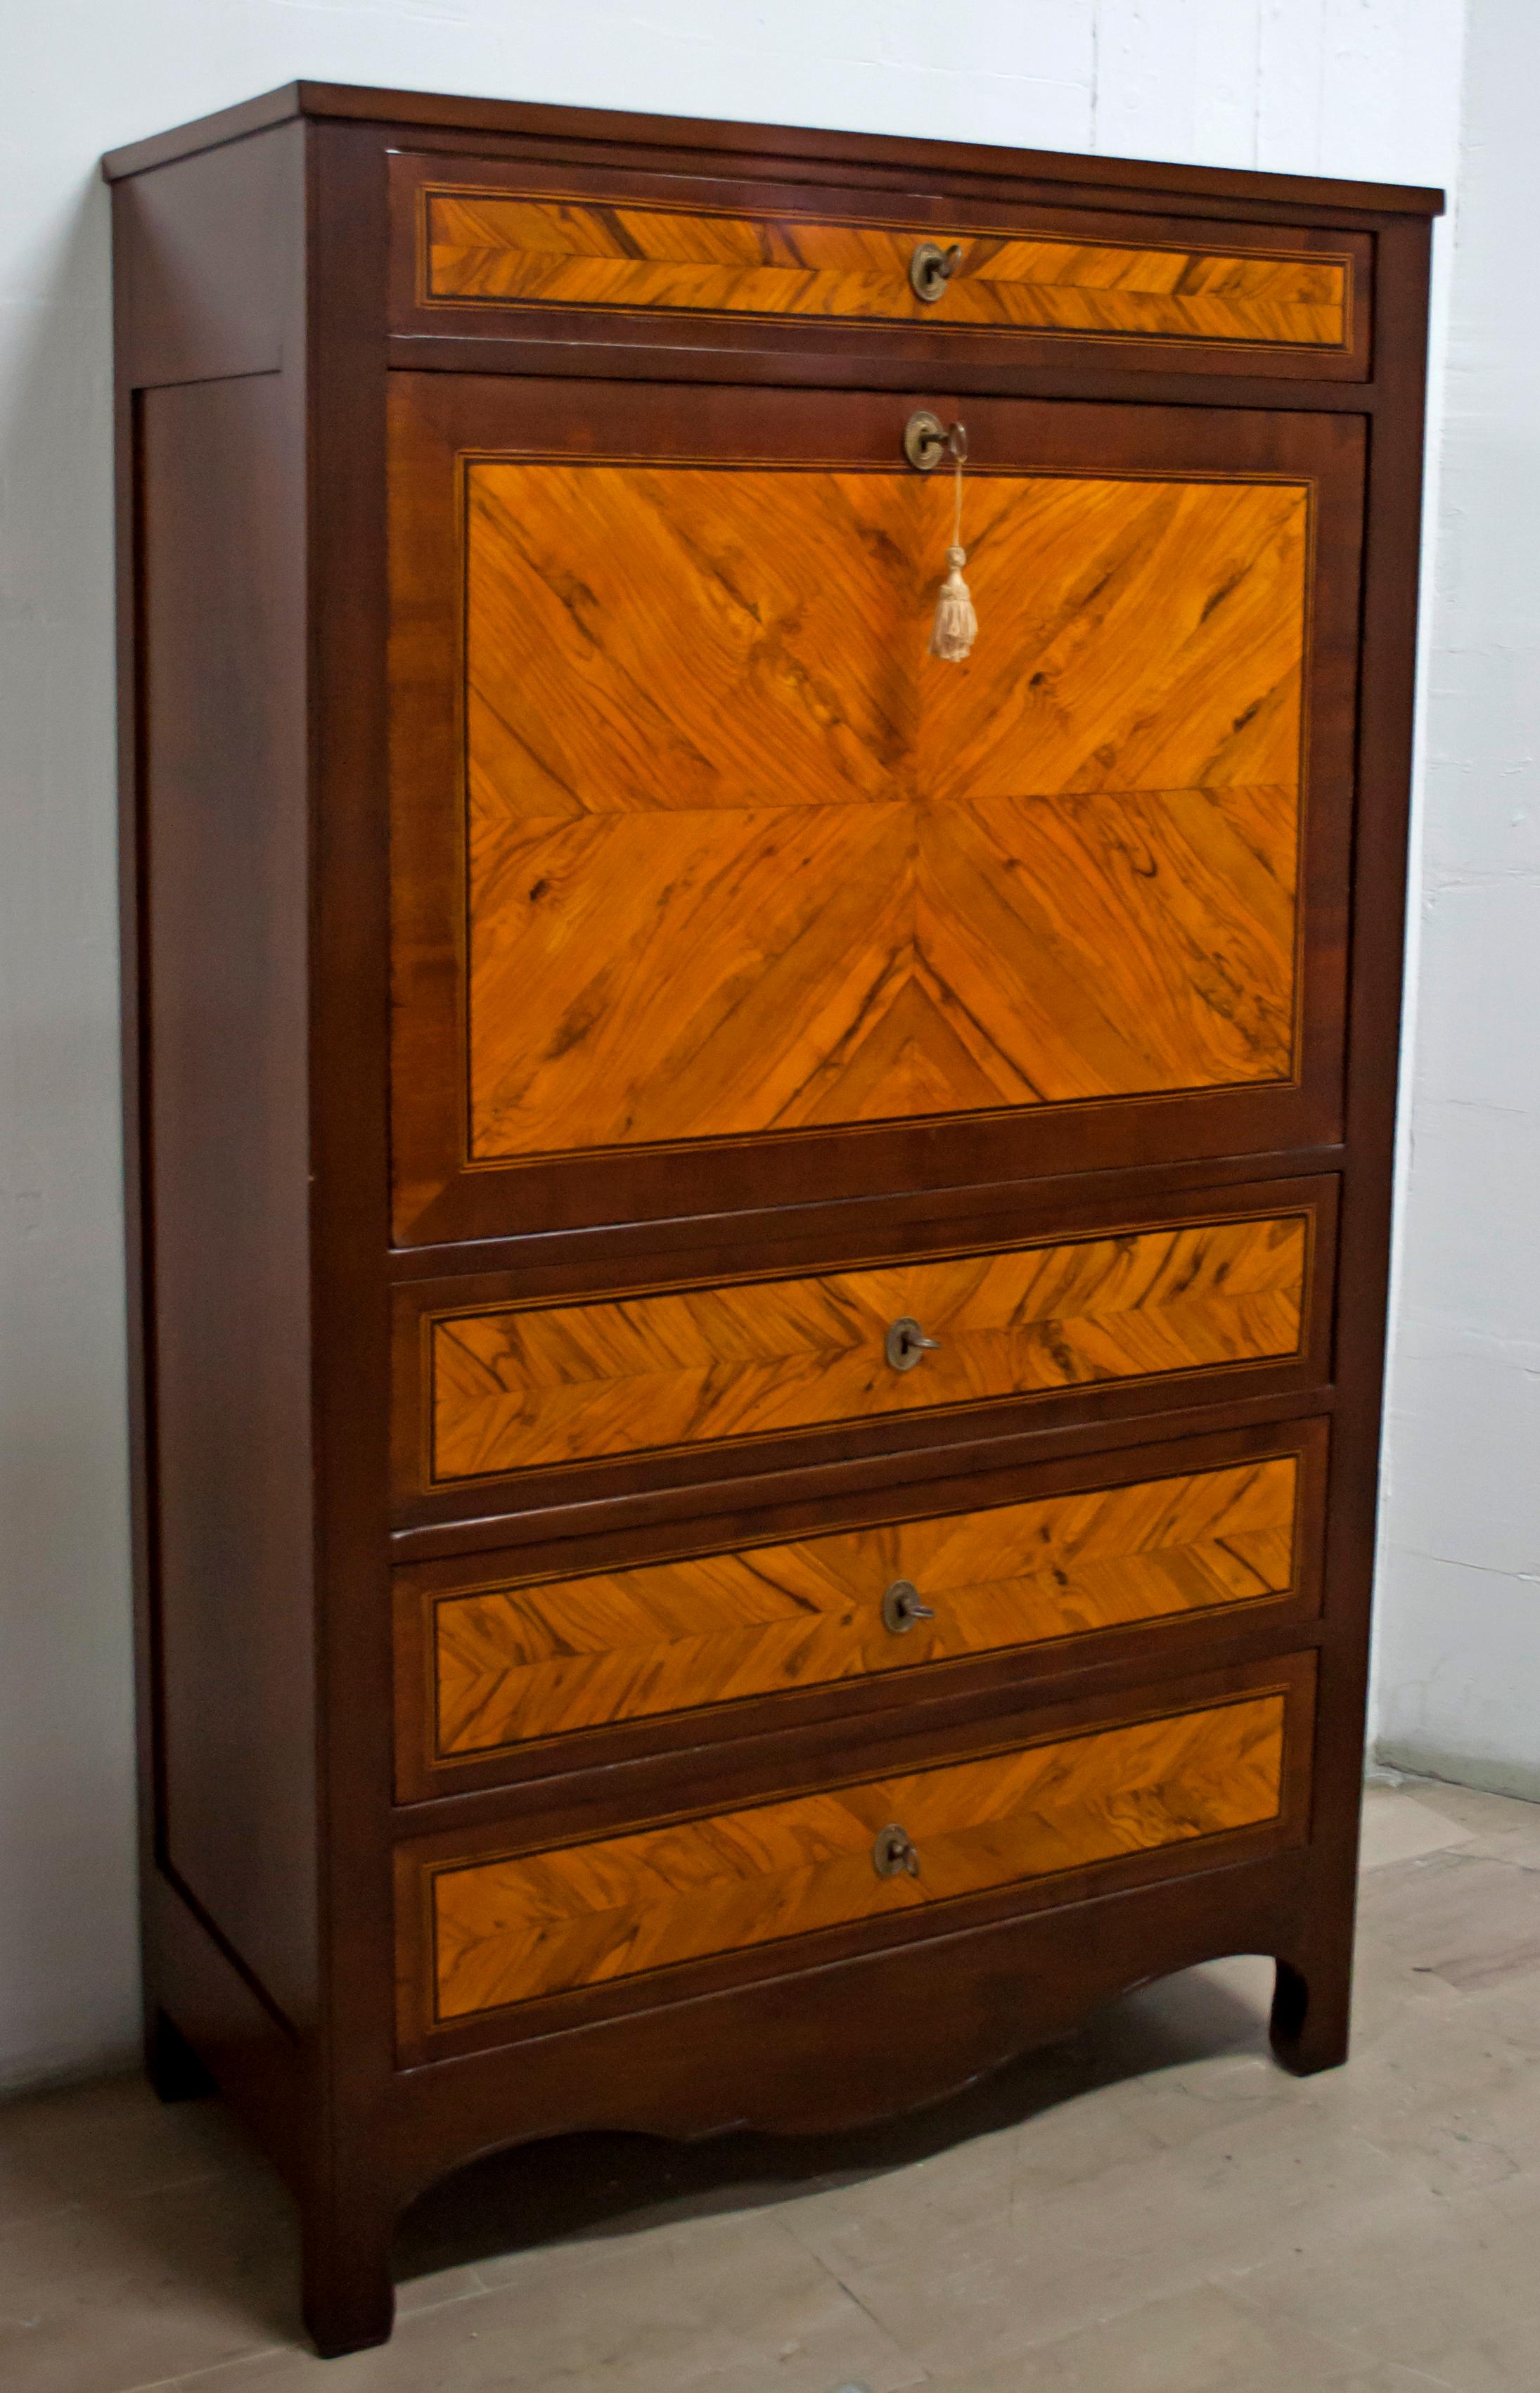 This secretaire walnut wood with olive root inlays dates back to the Liberty period, 1920s.

 